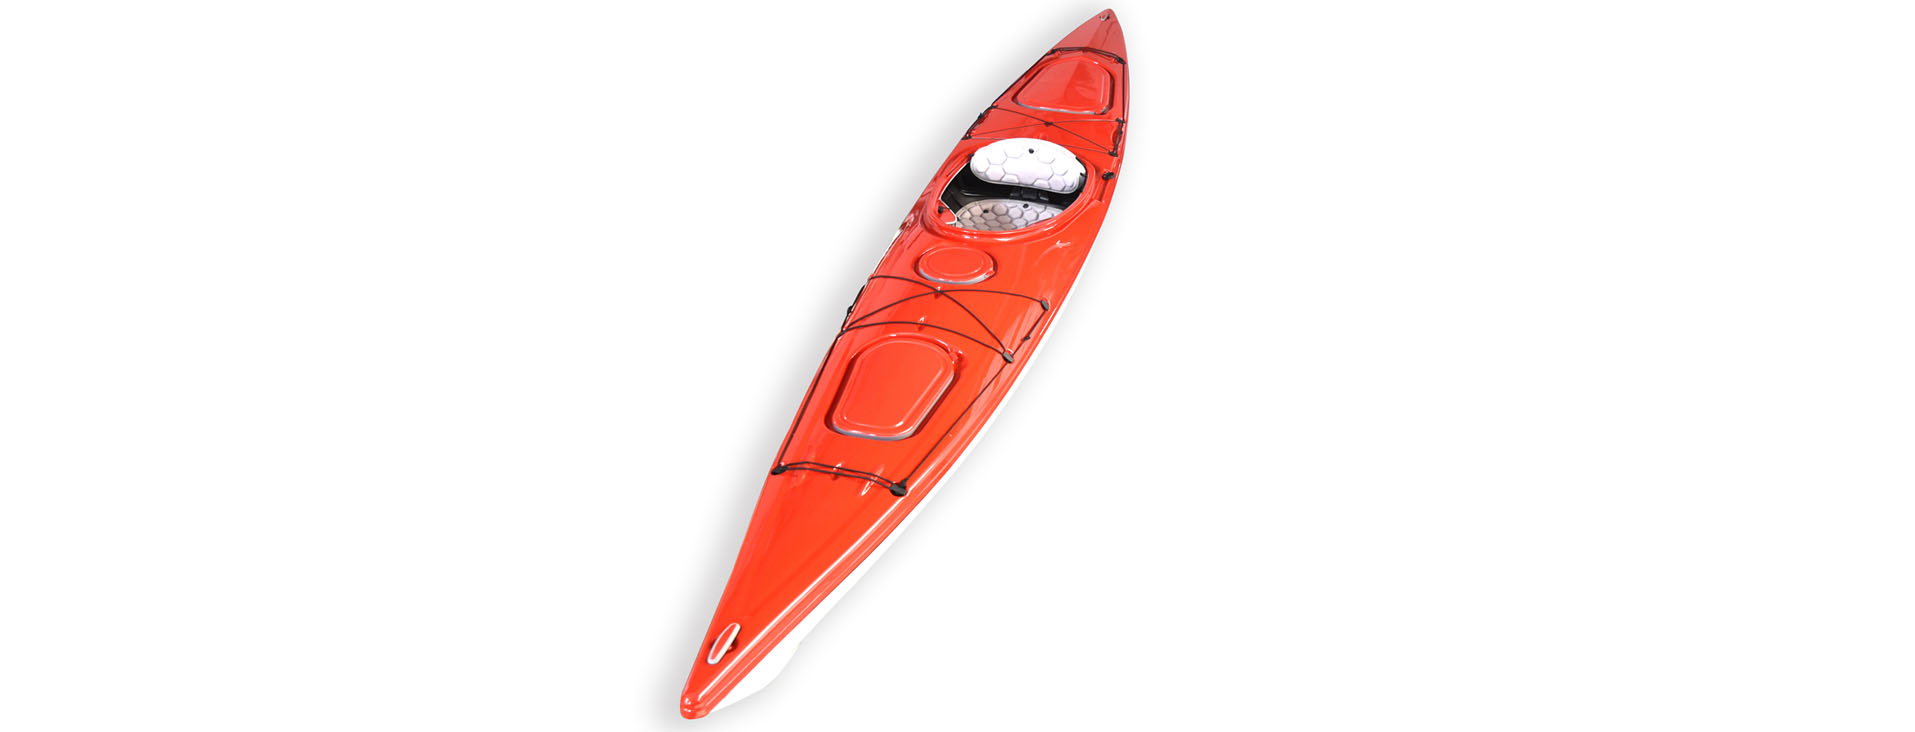 good price and quality canoekayak products